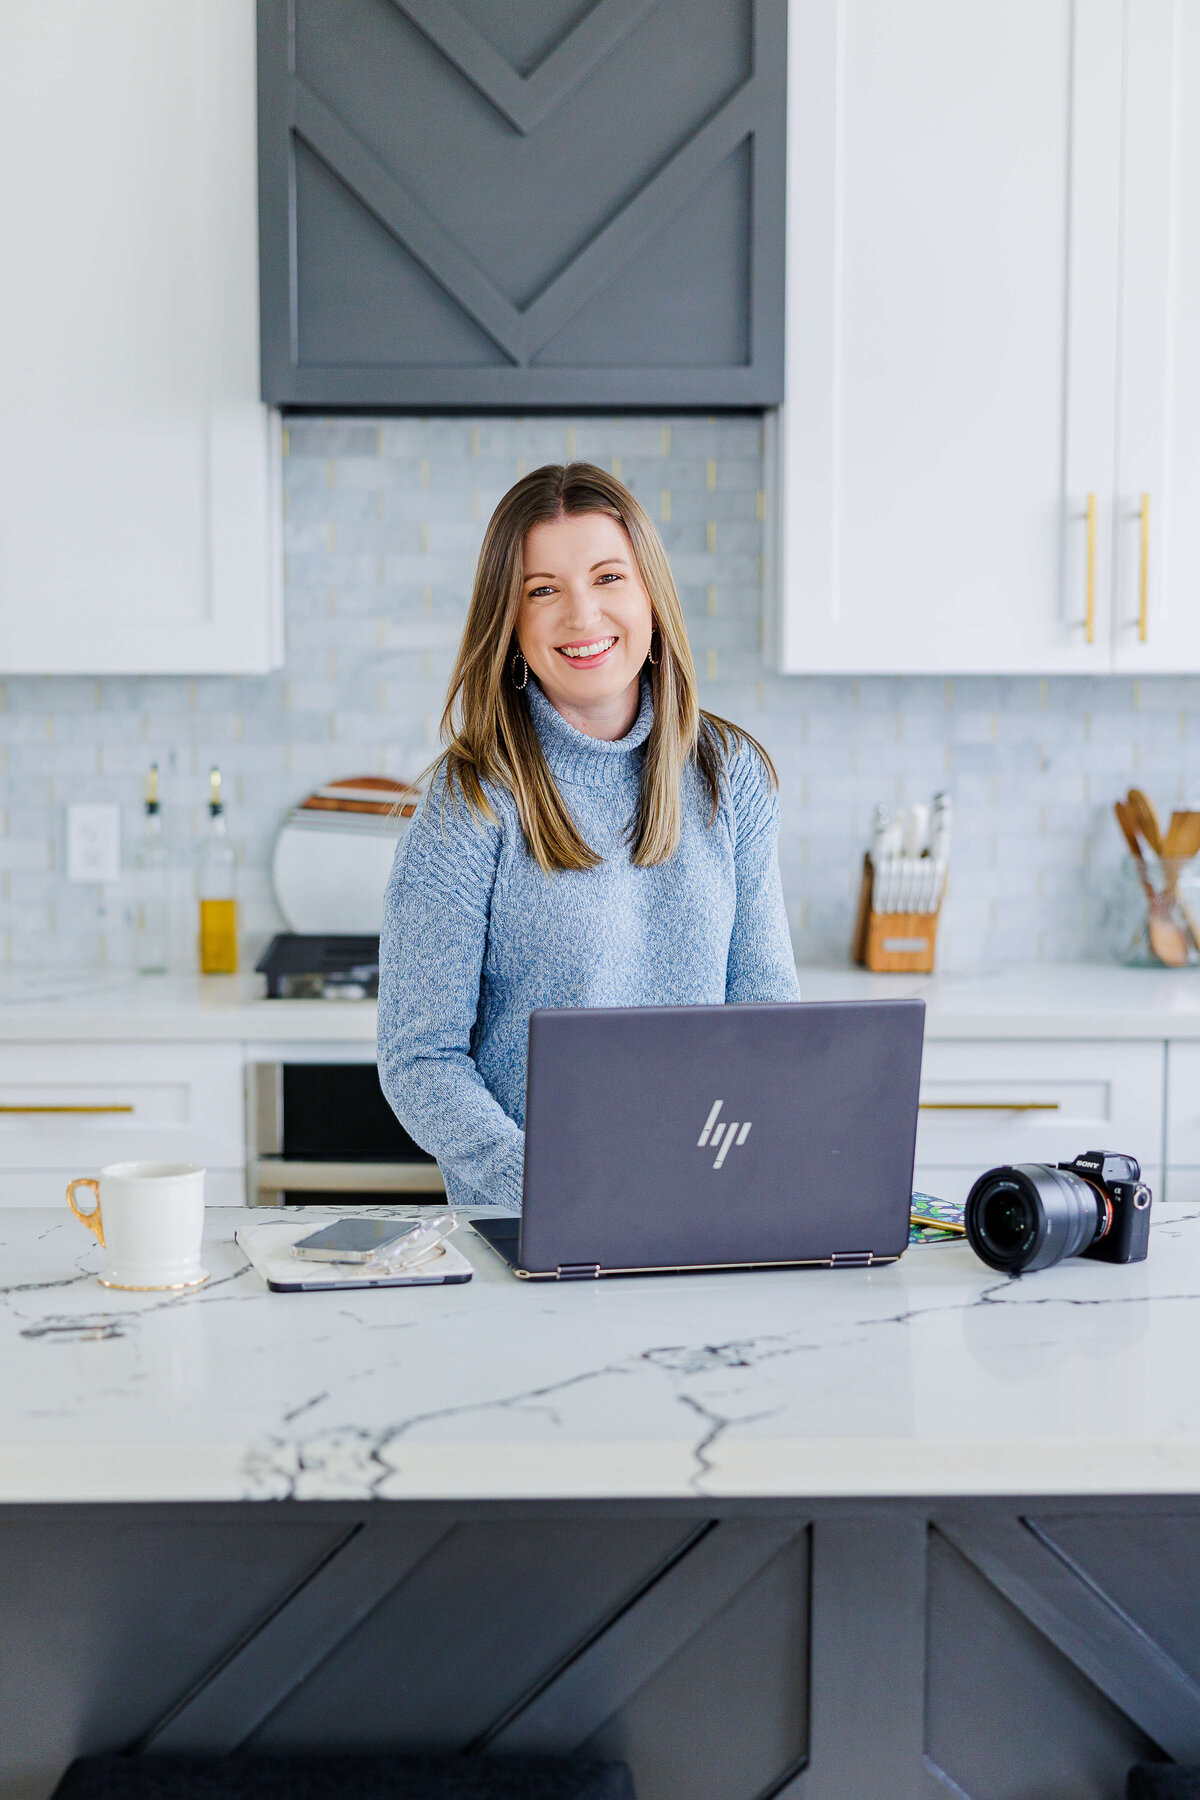 Lady working on laptop in kitchen